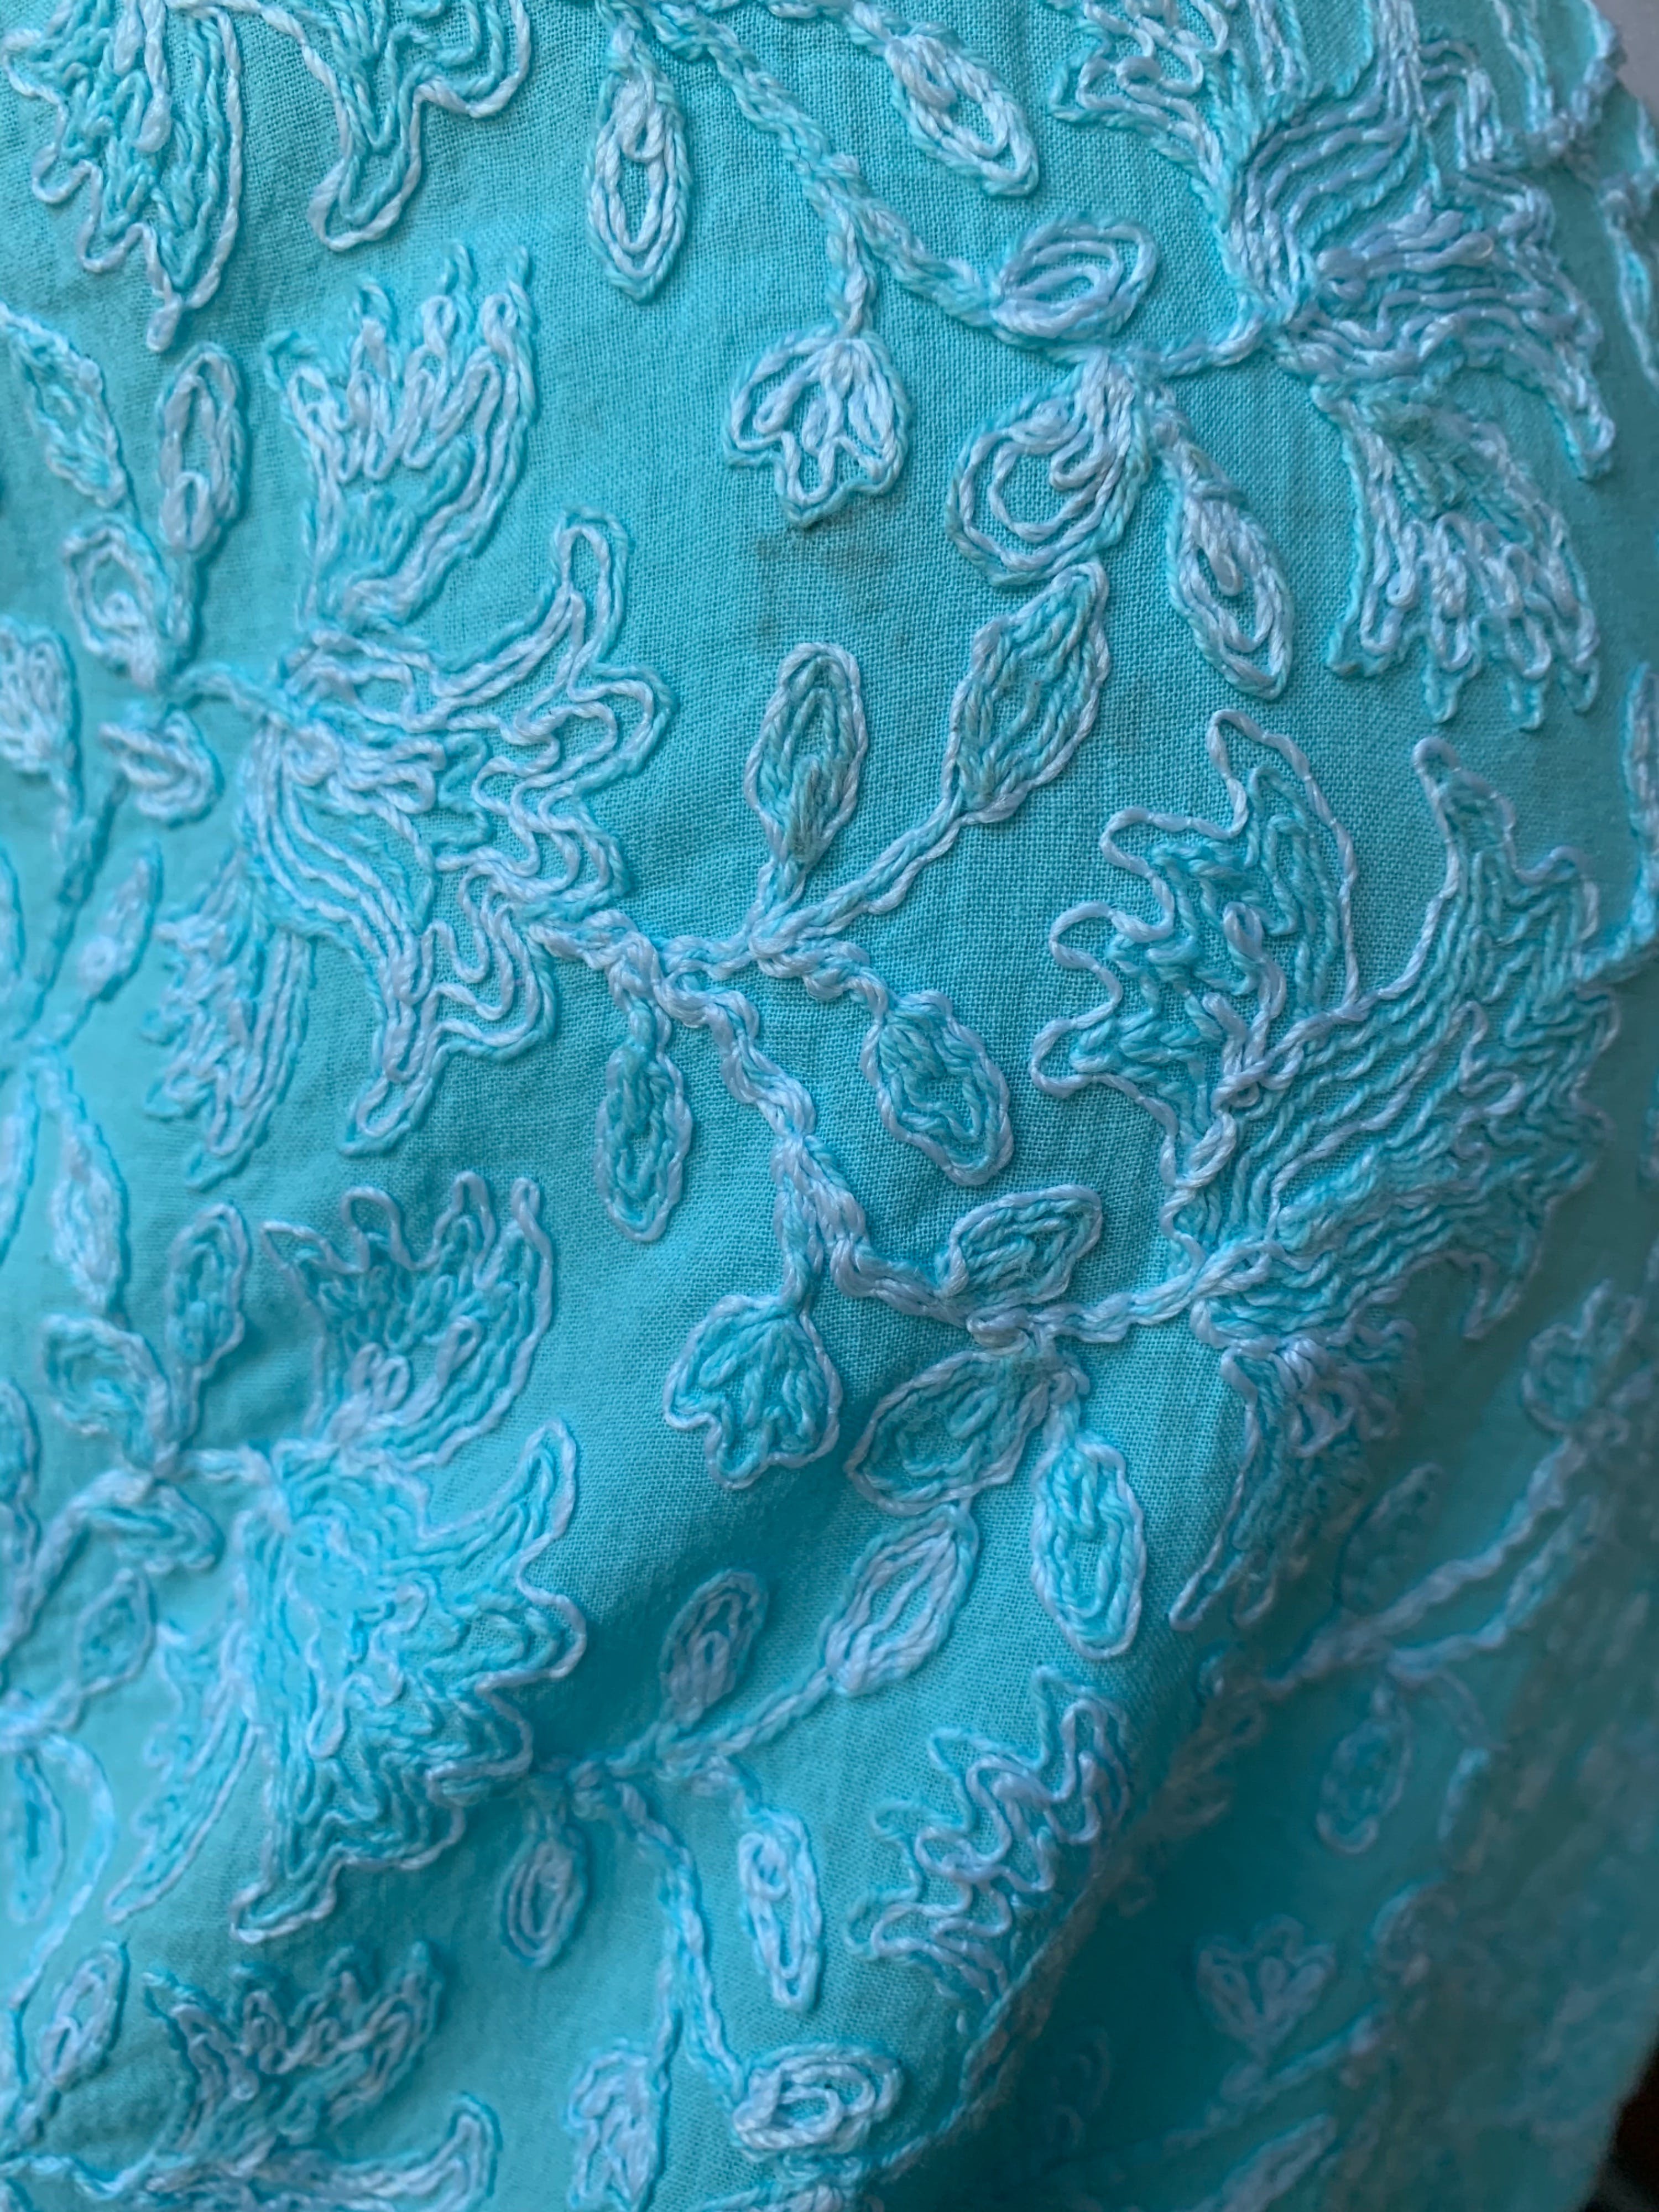 Vintage Turquoise Embroidered Tunic | Shop THRILLING